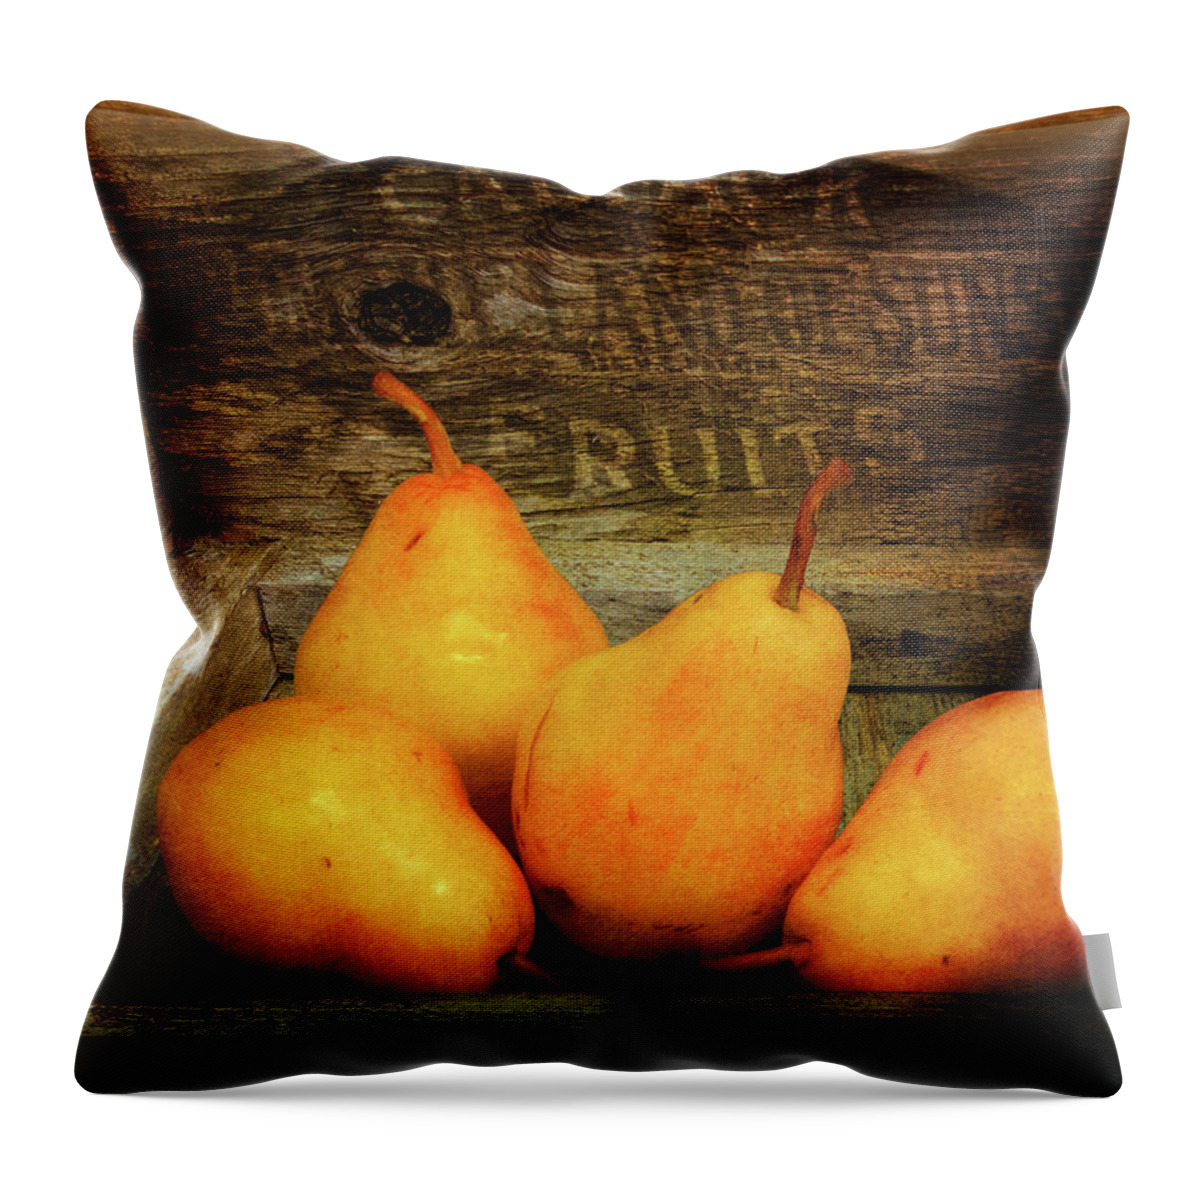 Pears Throw Pillow featuring the photograph Final Four by John Anderson